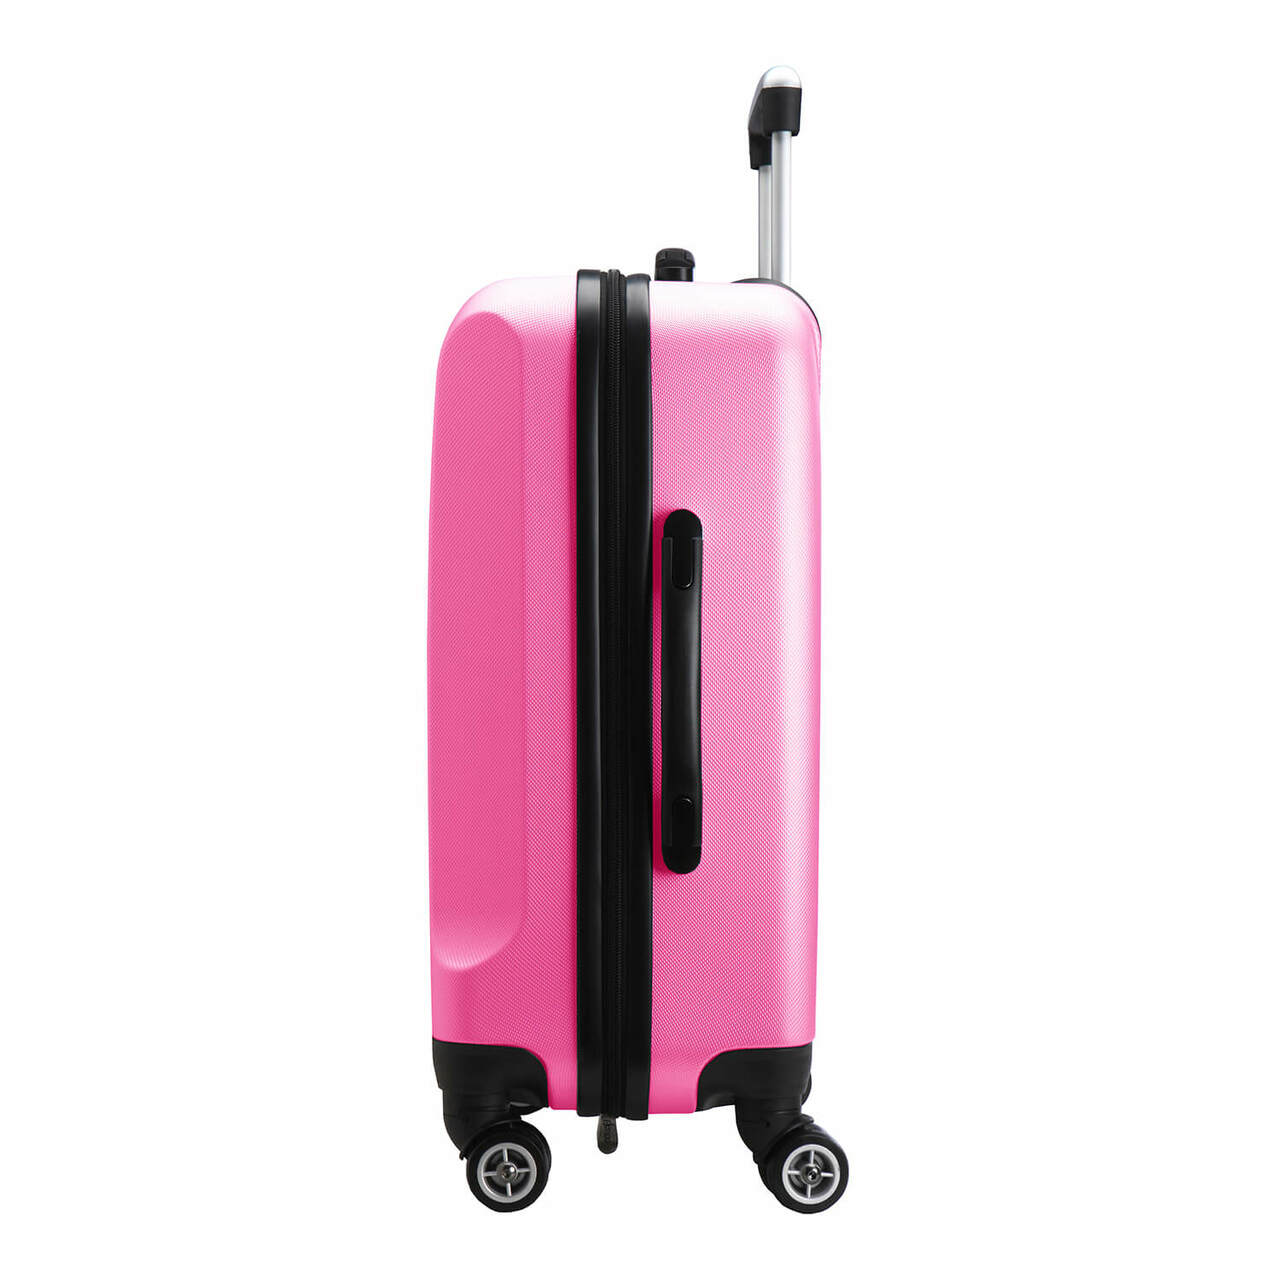 Fresno State Bulldogs 20" Pink Domestic Carry-on Spinner